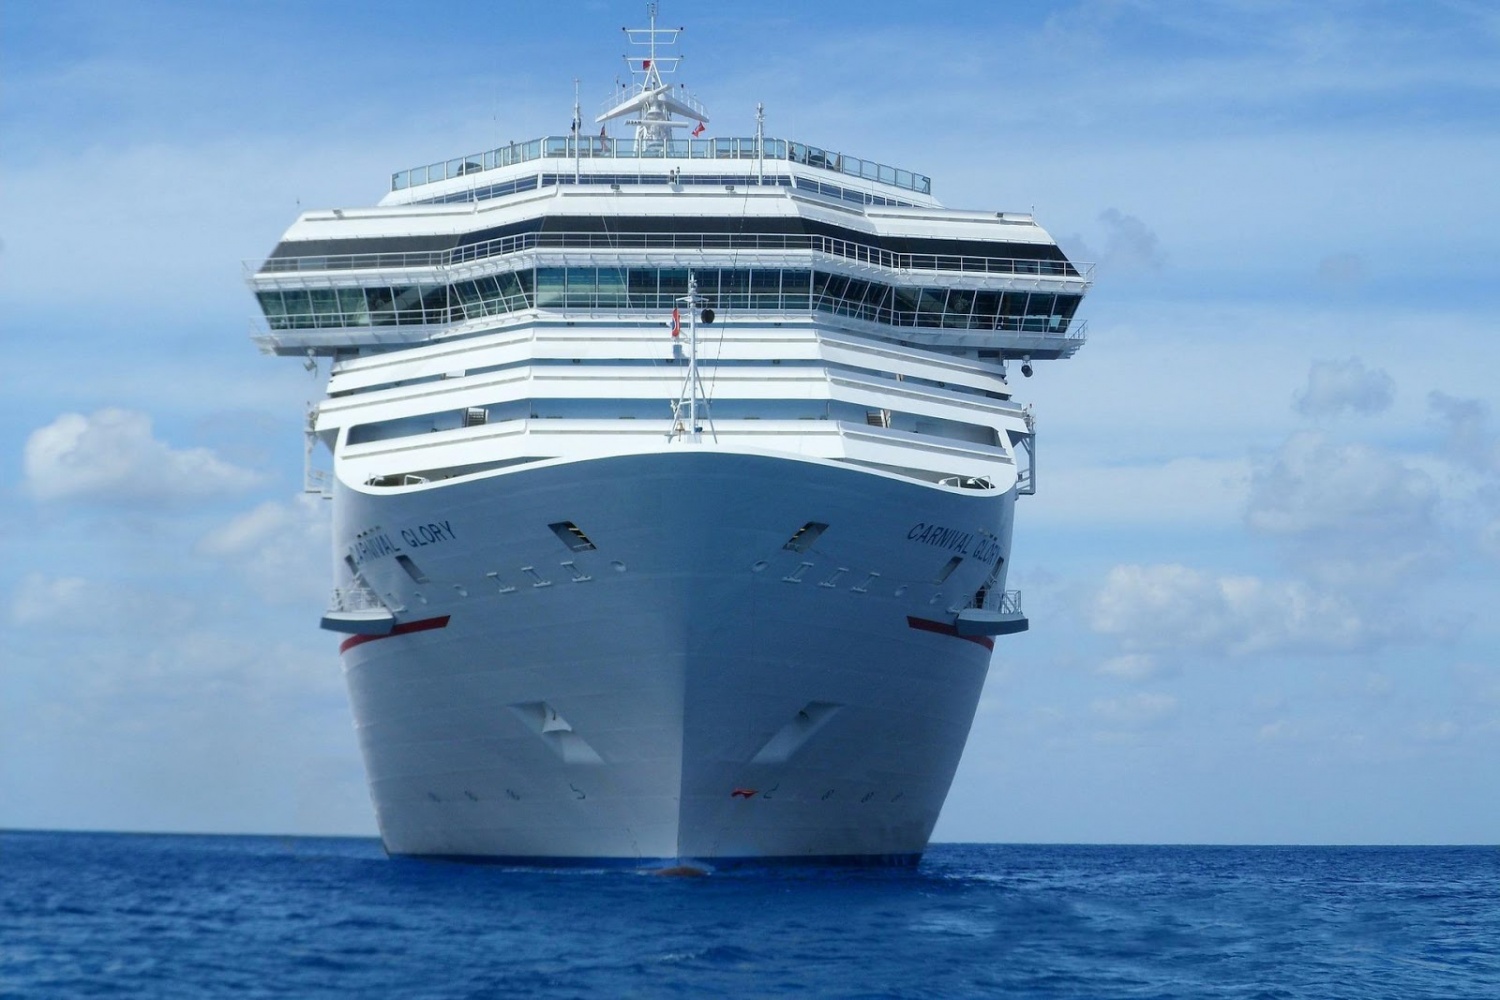 5 Most Common Injuries Suffered On A Cruise Ship